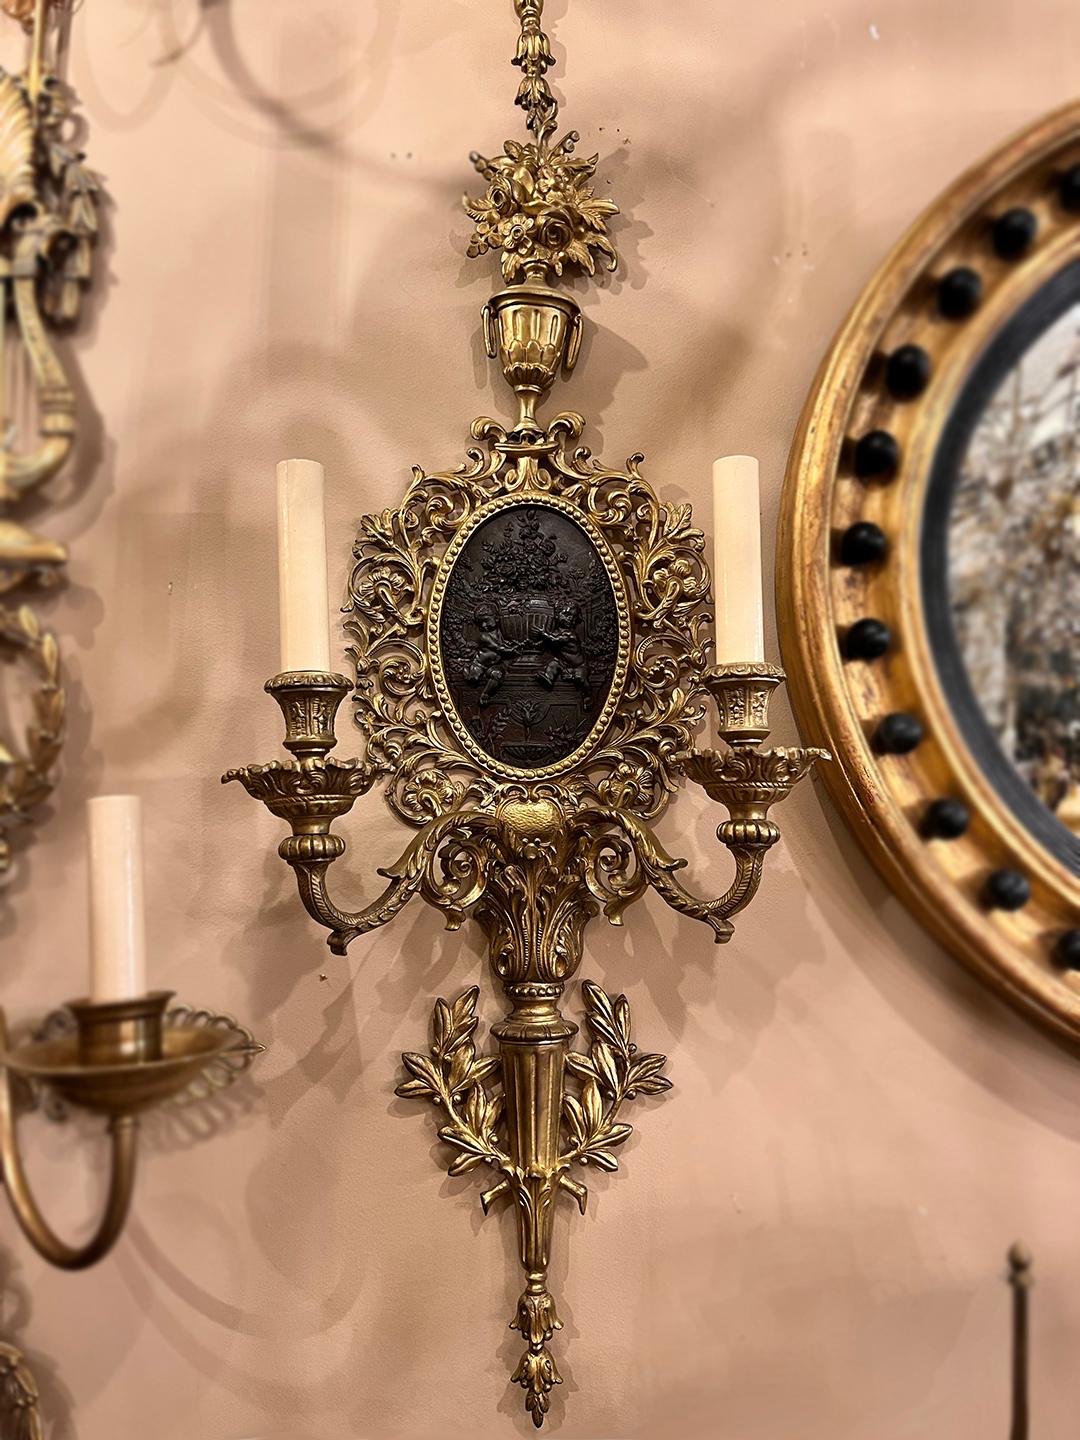 A pair of circa 1900 French sconces in gilt bronze with a patinated bronze central medallion.

Measurements:
Height 28.5